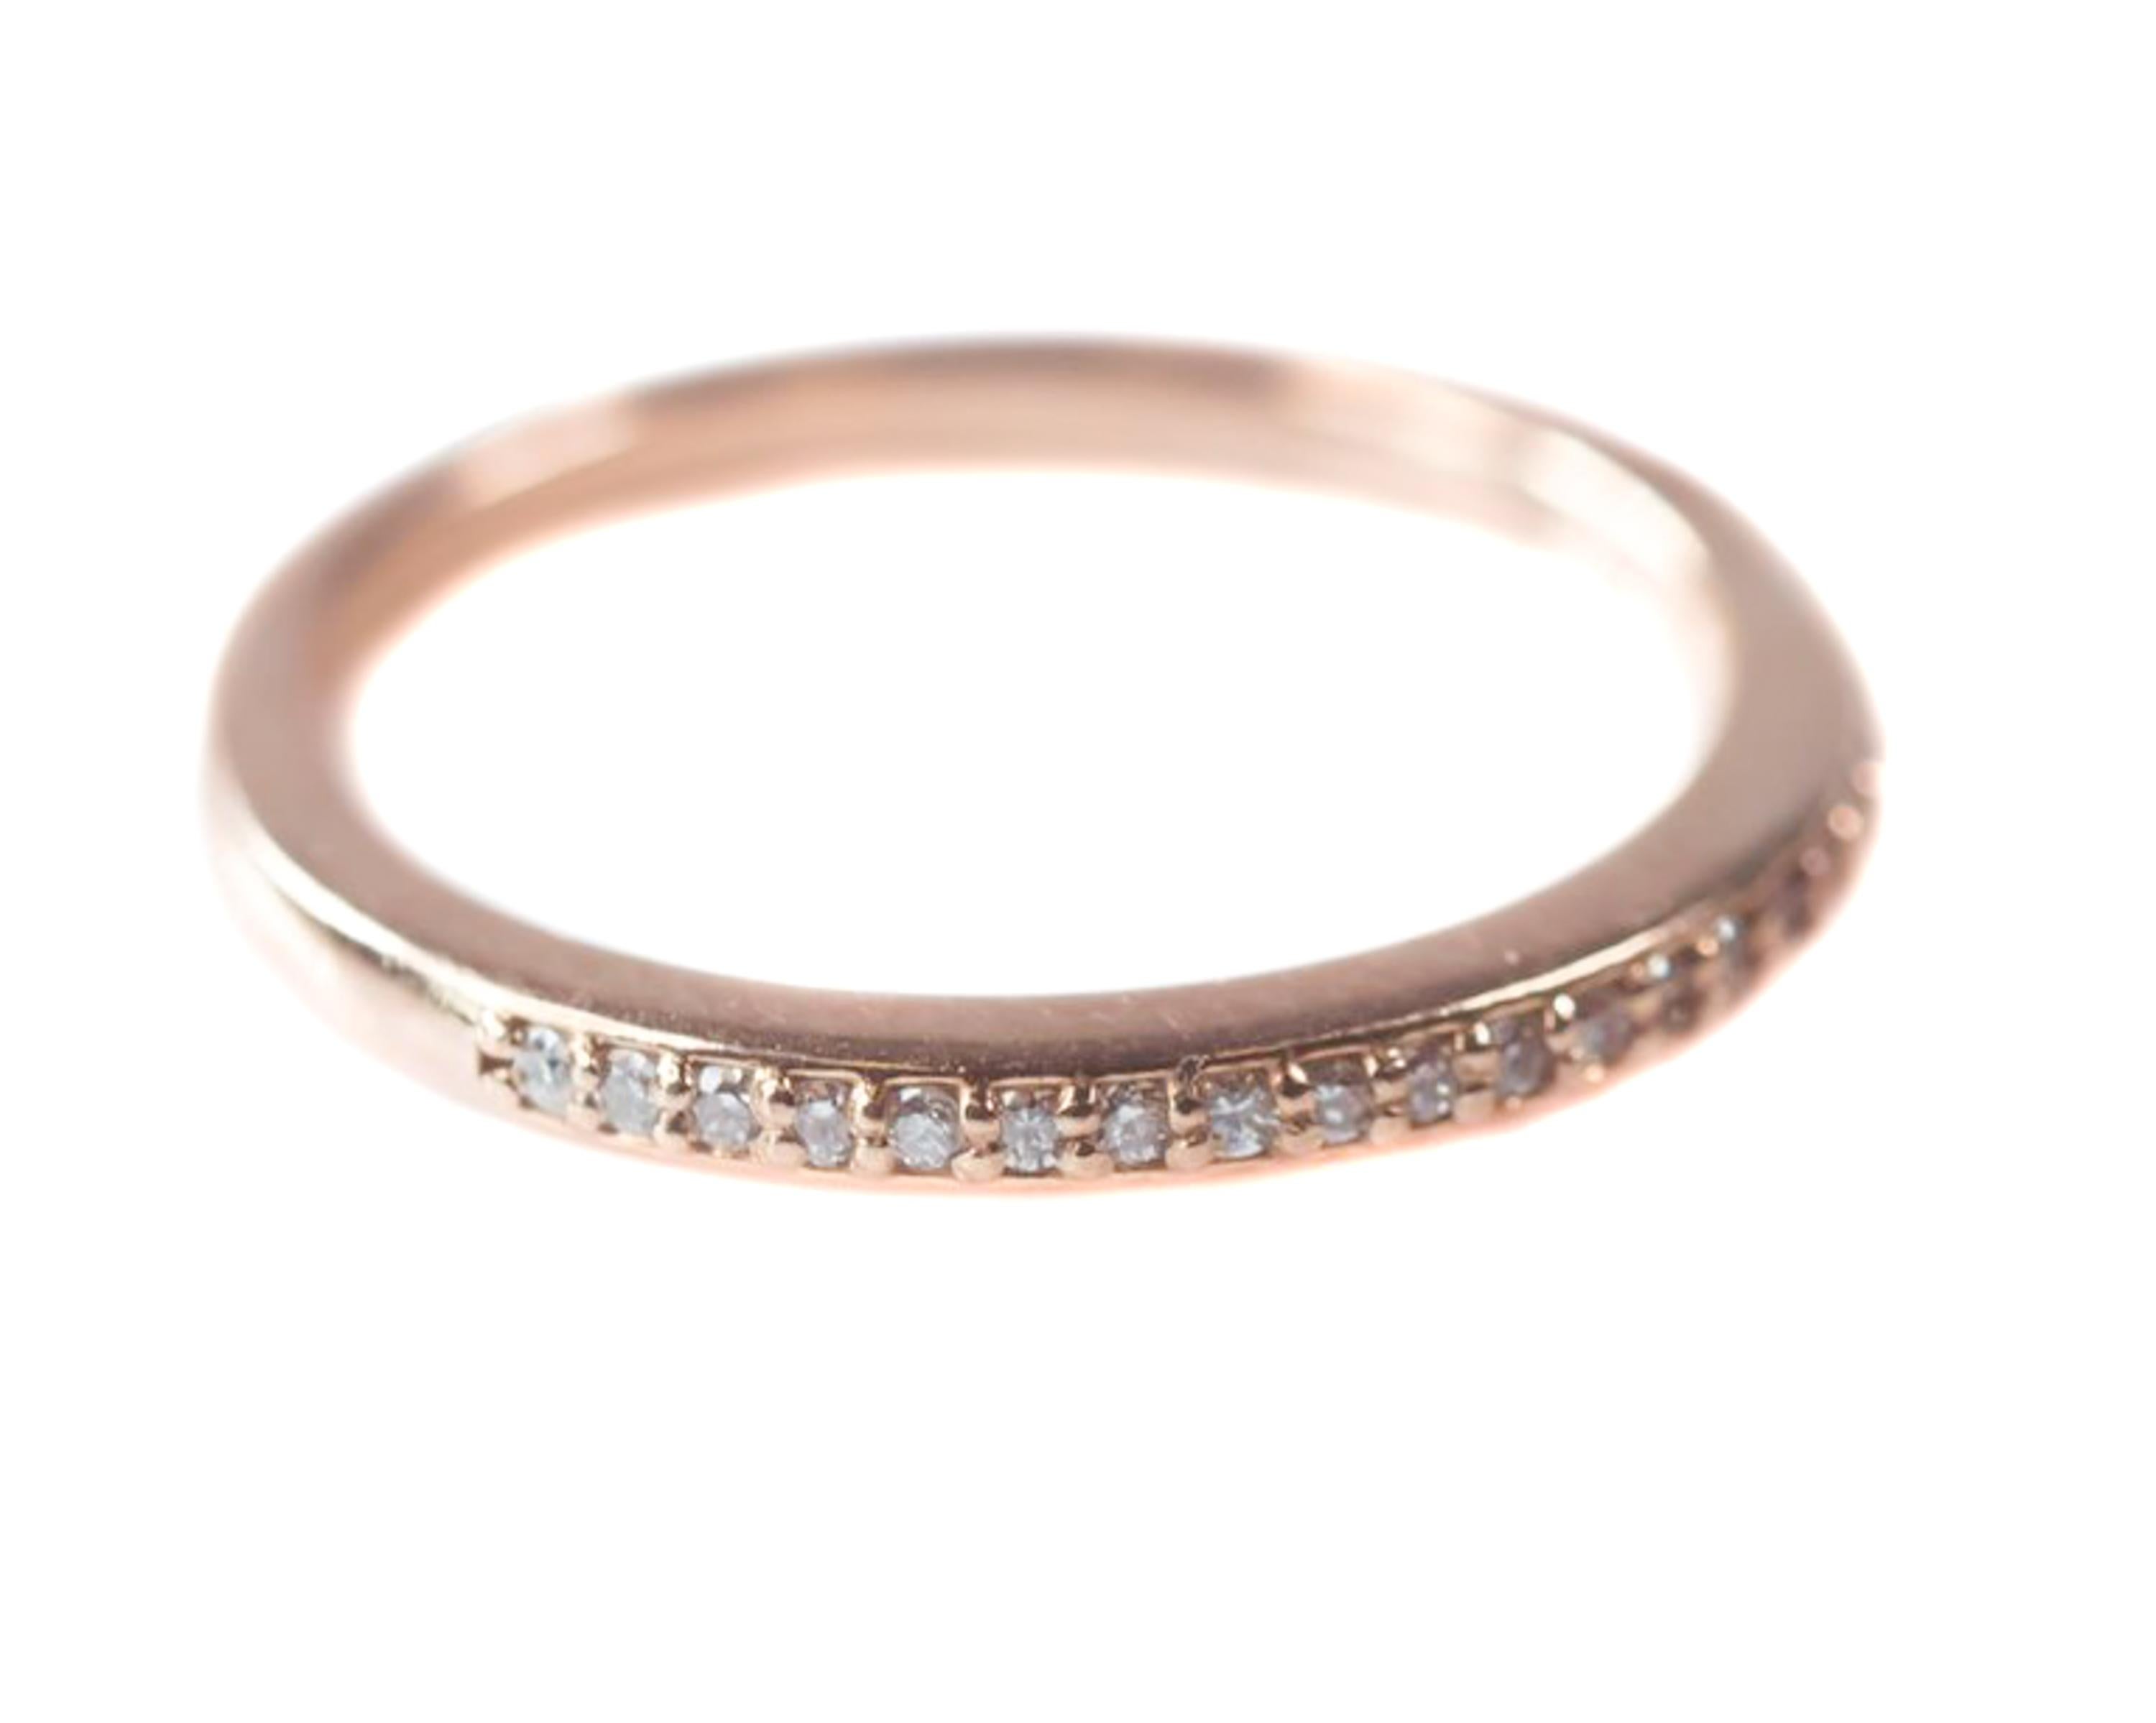 14 Karat Rose Gold and 0.25 carat total weight Diamond Eternity Band - Halfway around eternity band

Features 0.25 cttw Round Brilliant Diamonds prong set in 14K Rose Gold. The front half of the ring is covered in Diamonds. The back half of the ring